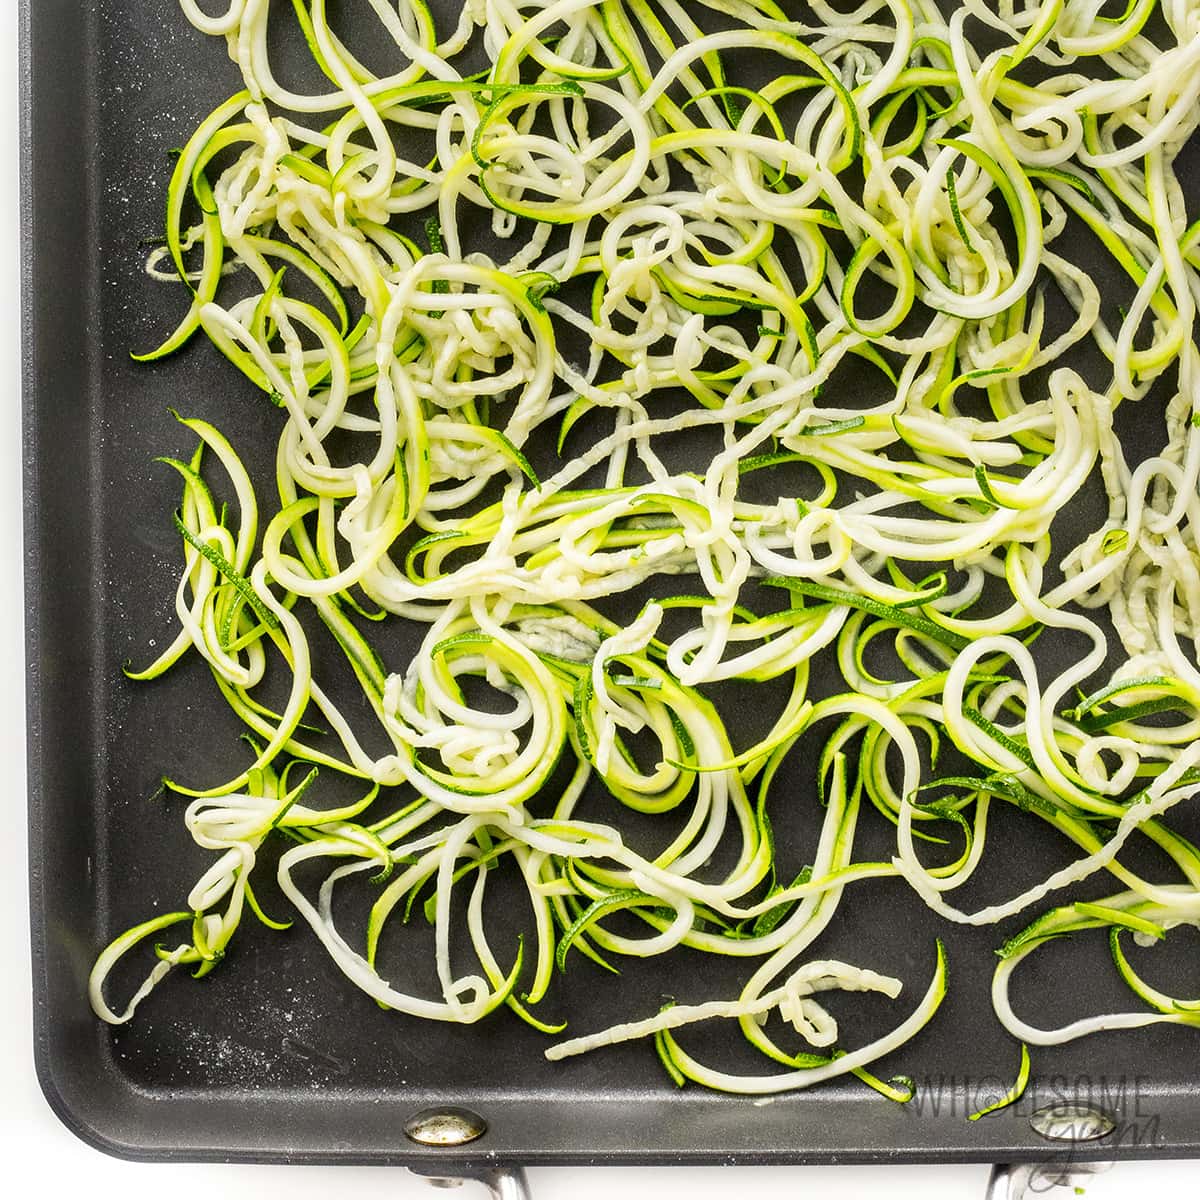 Cooked zucchini noodles on a baking sheet.